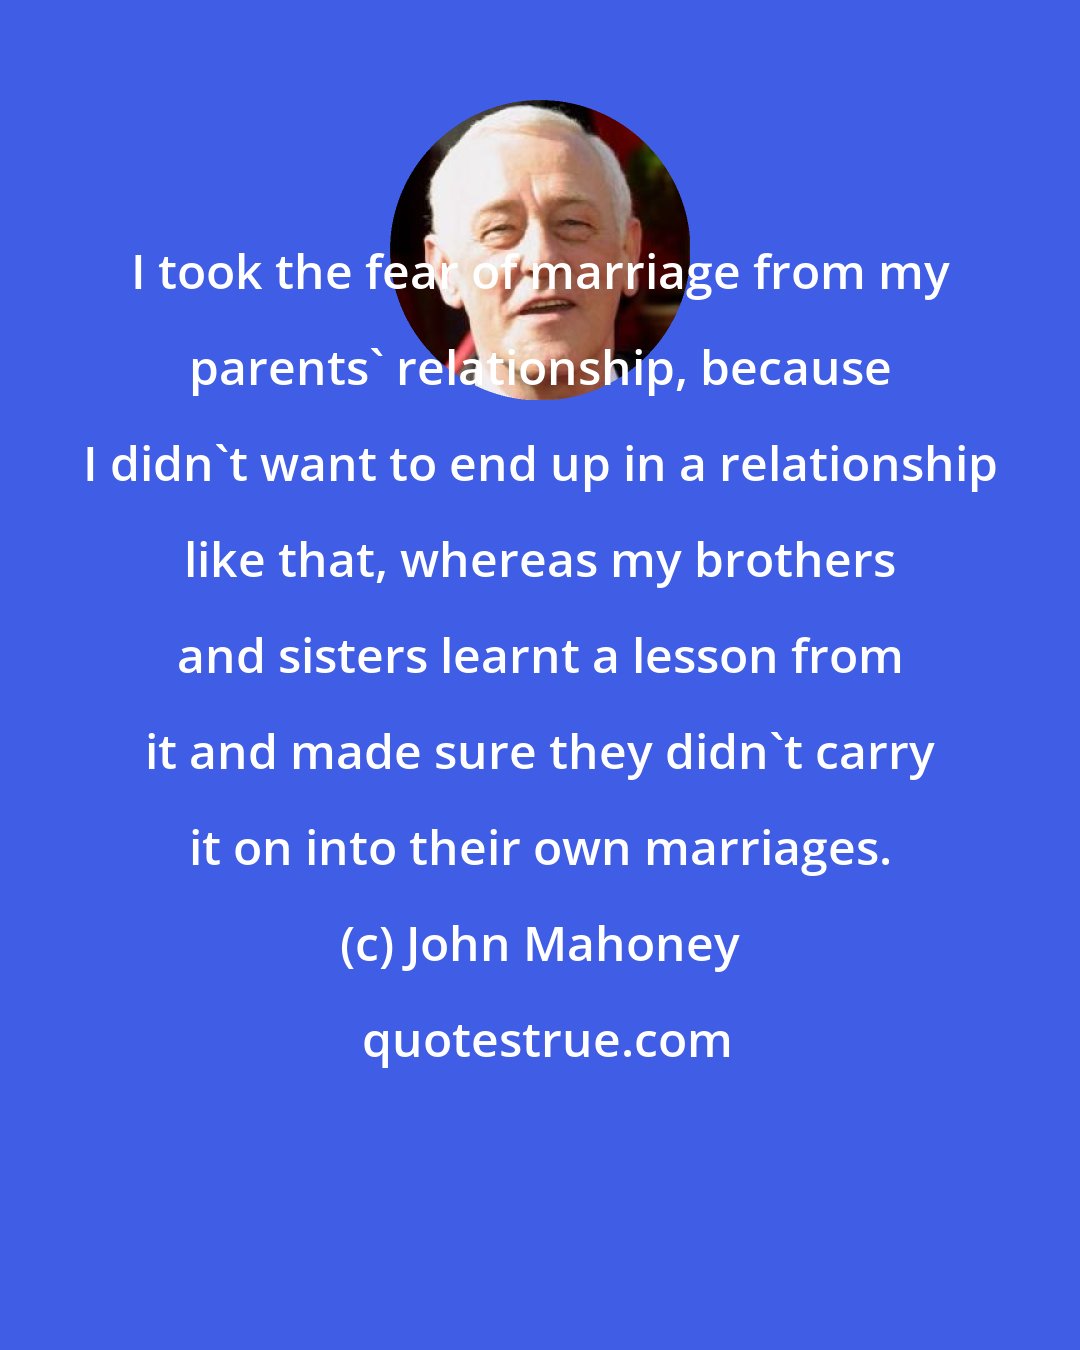 John Mahoney: I took the fear of marriage from my parents' relationship, because I didn't want to end up in a relationship like that, whereas my brothers and sisters learnt a lesson from it and made sure they didn't carry it on into their own marriages.